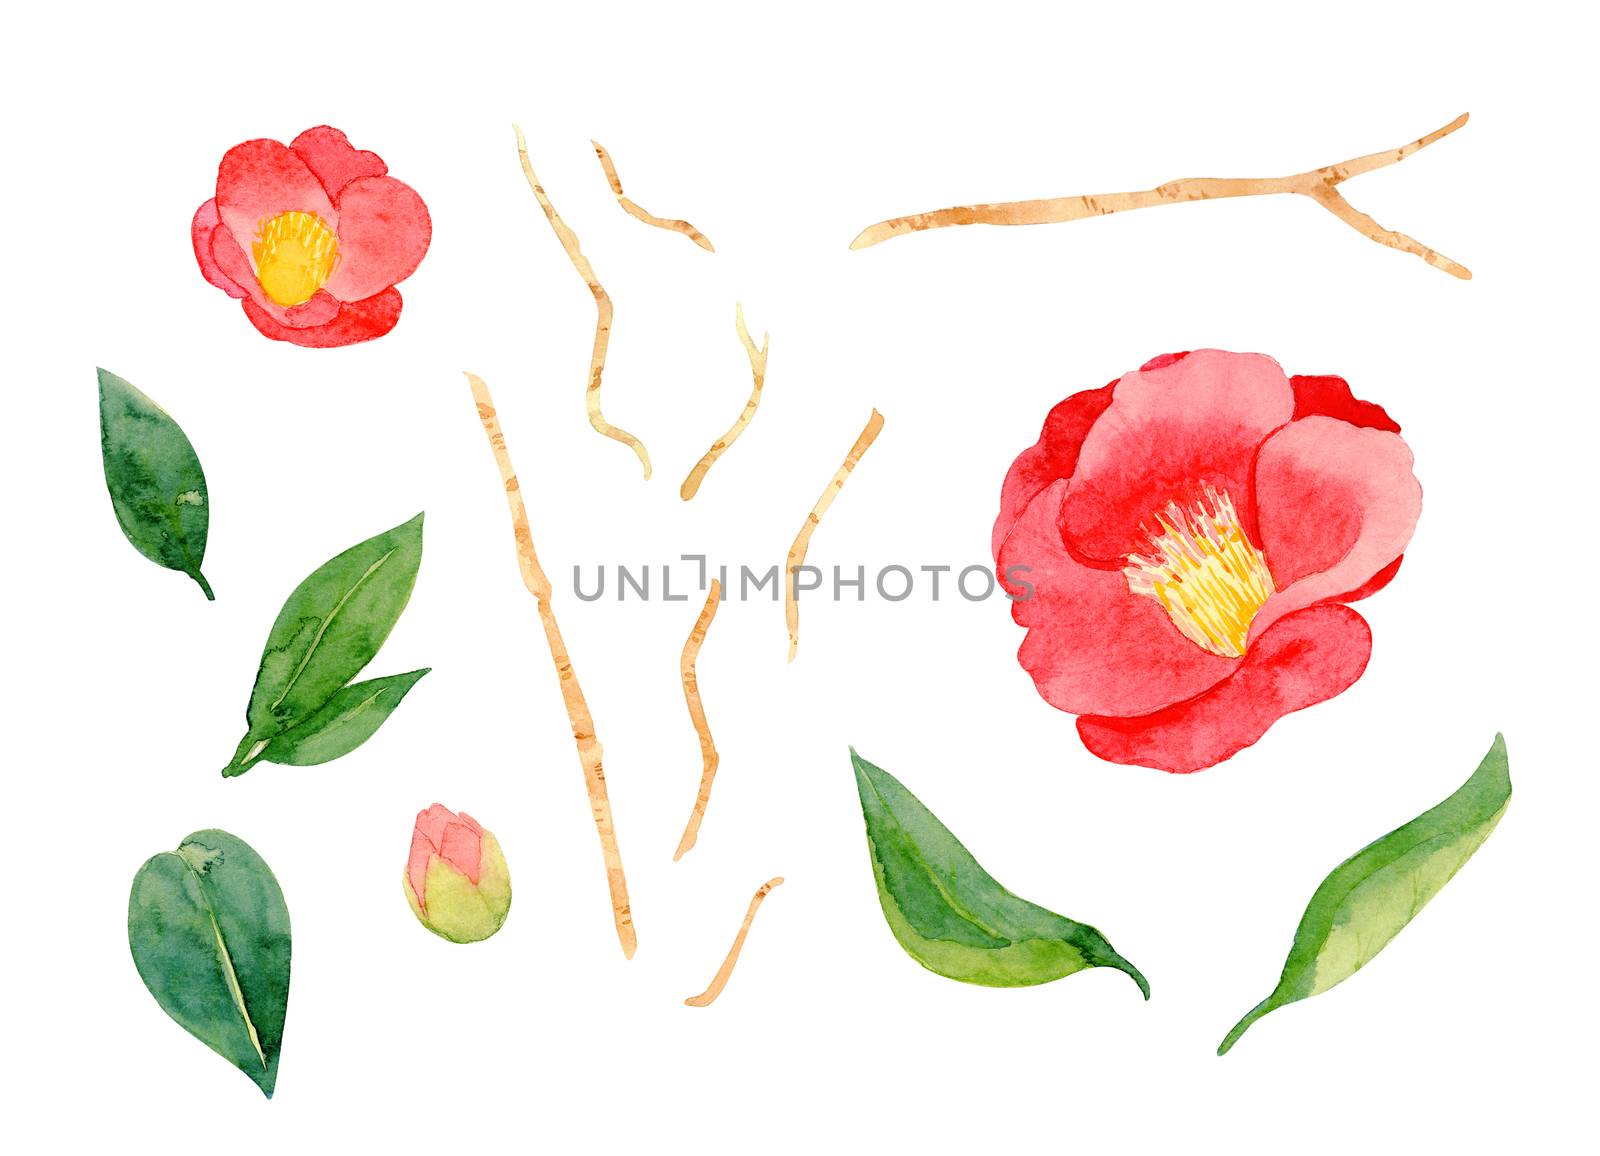 red camellia japonica flower and leaves isolated on white background. Japanese tsubaki. Symbol of love. Watercolor hand painting illustration. by Ungamrung